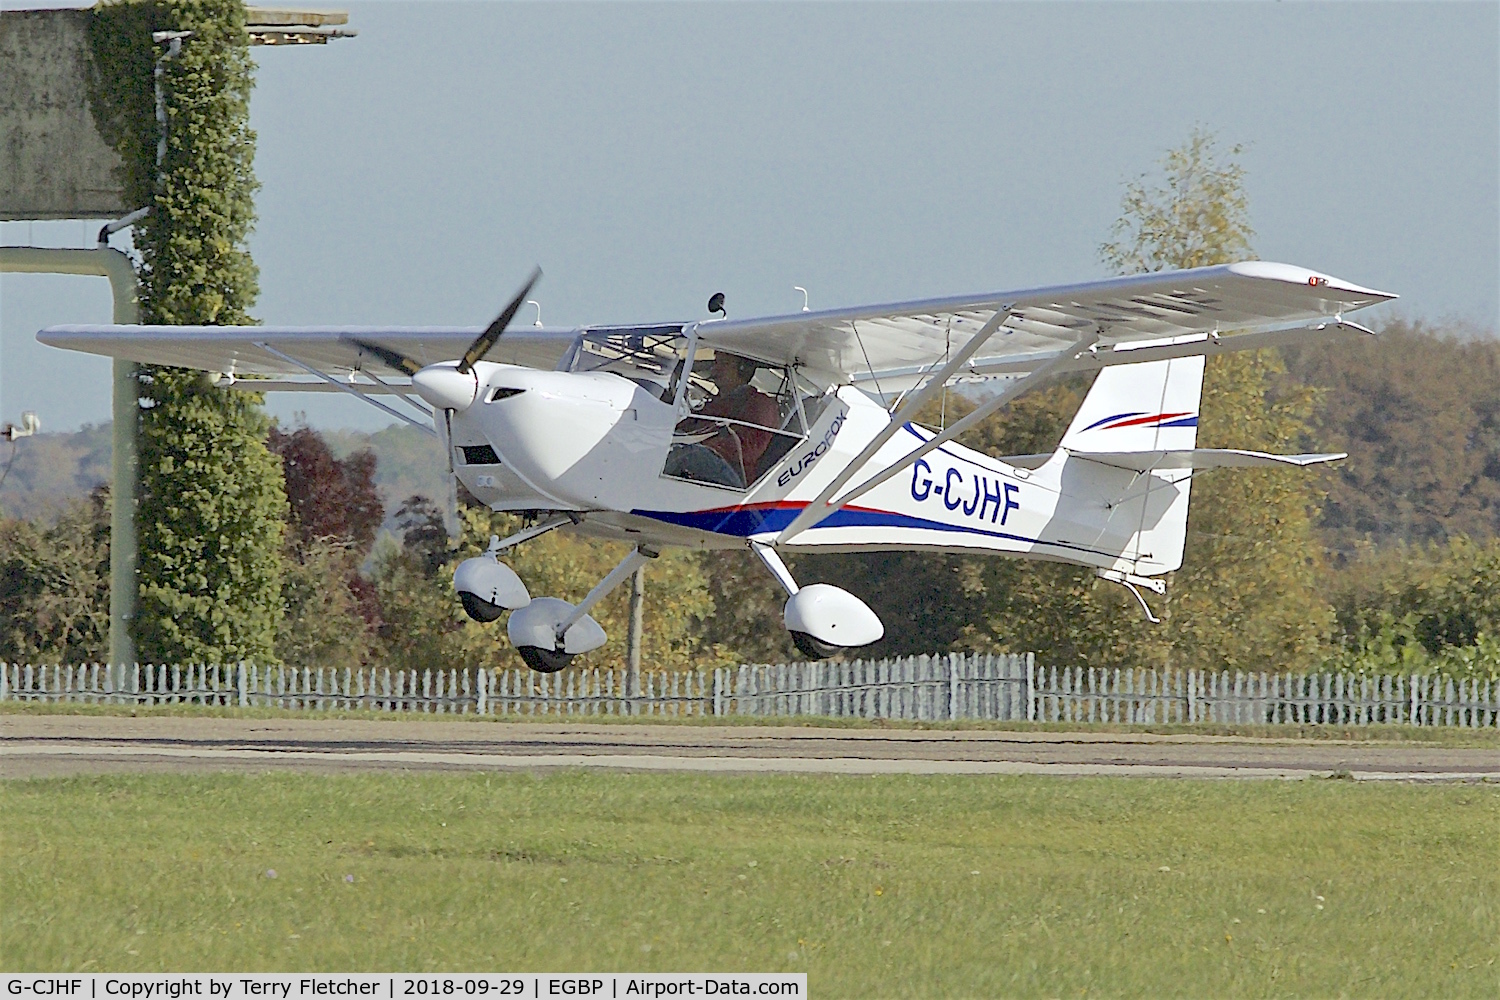 G-CJHF, 2016 Aeropro Eurofox 912(iS) C/N LAA 376-15399, During 2018 Cotswold Revival at Kemble